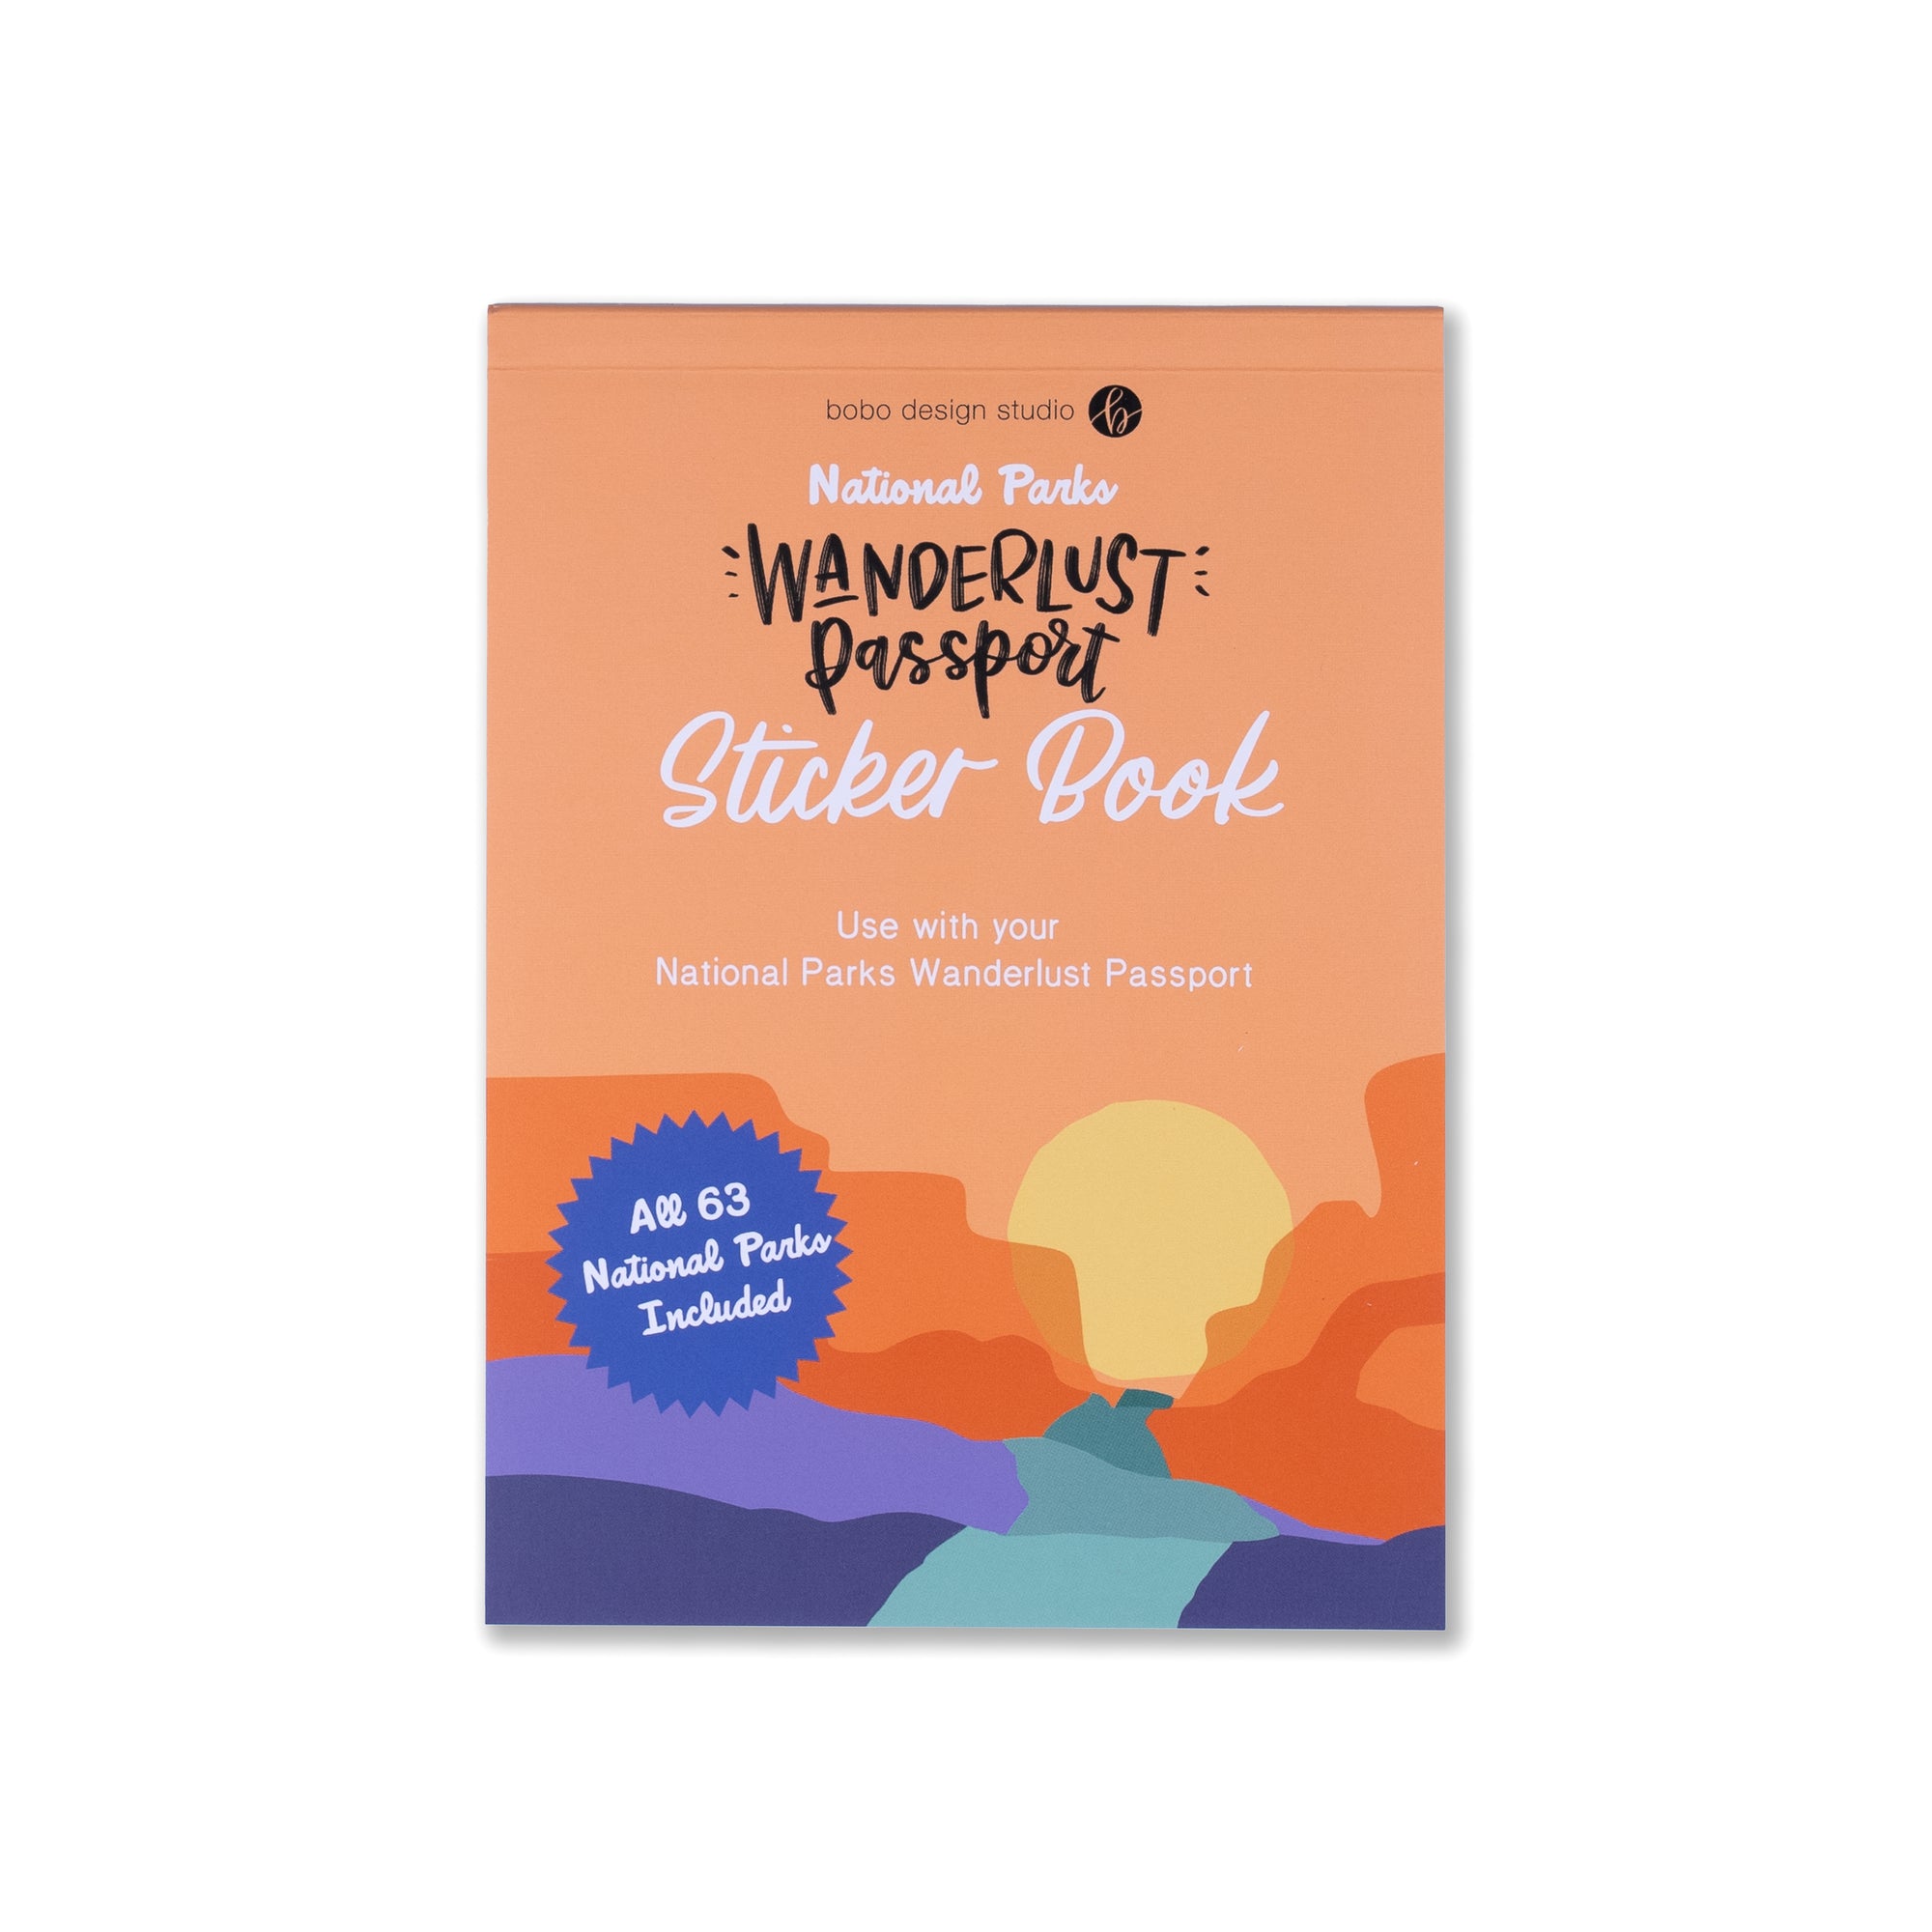 National Parks Wanderlust Passport Sticker book cover on a white background